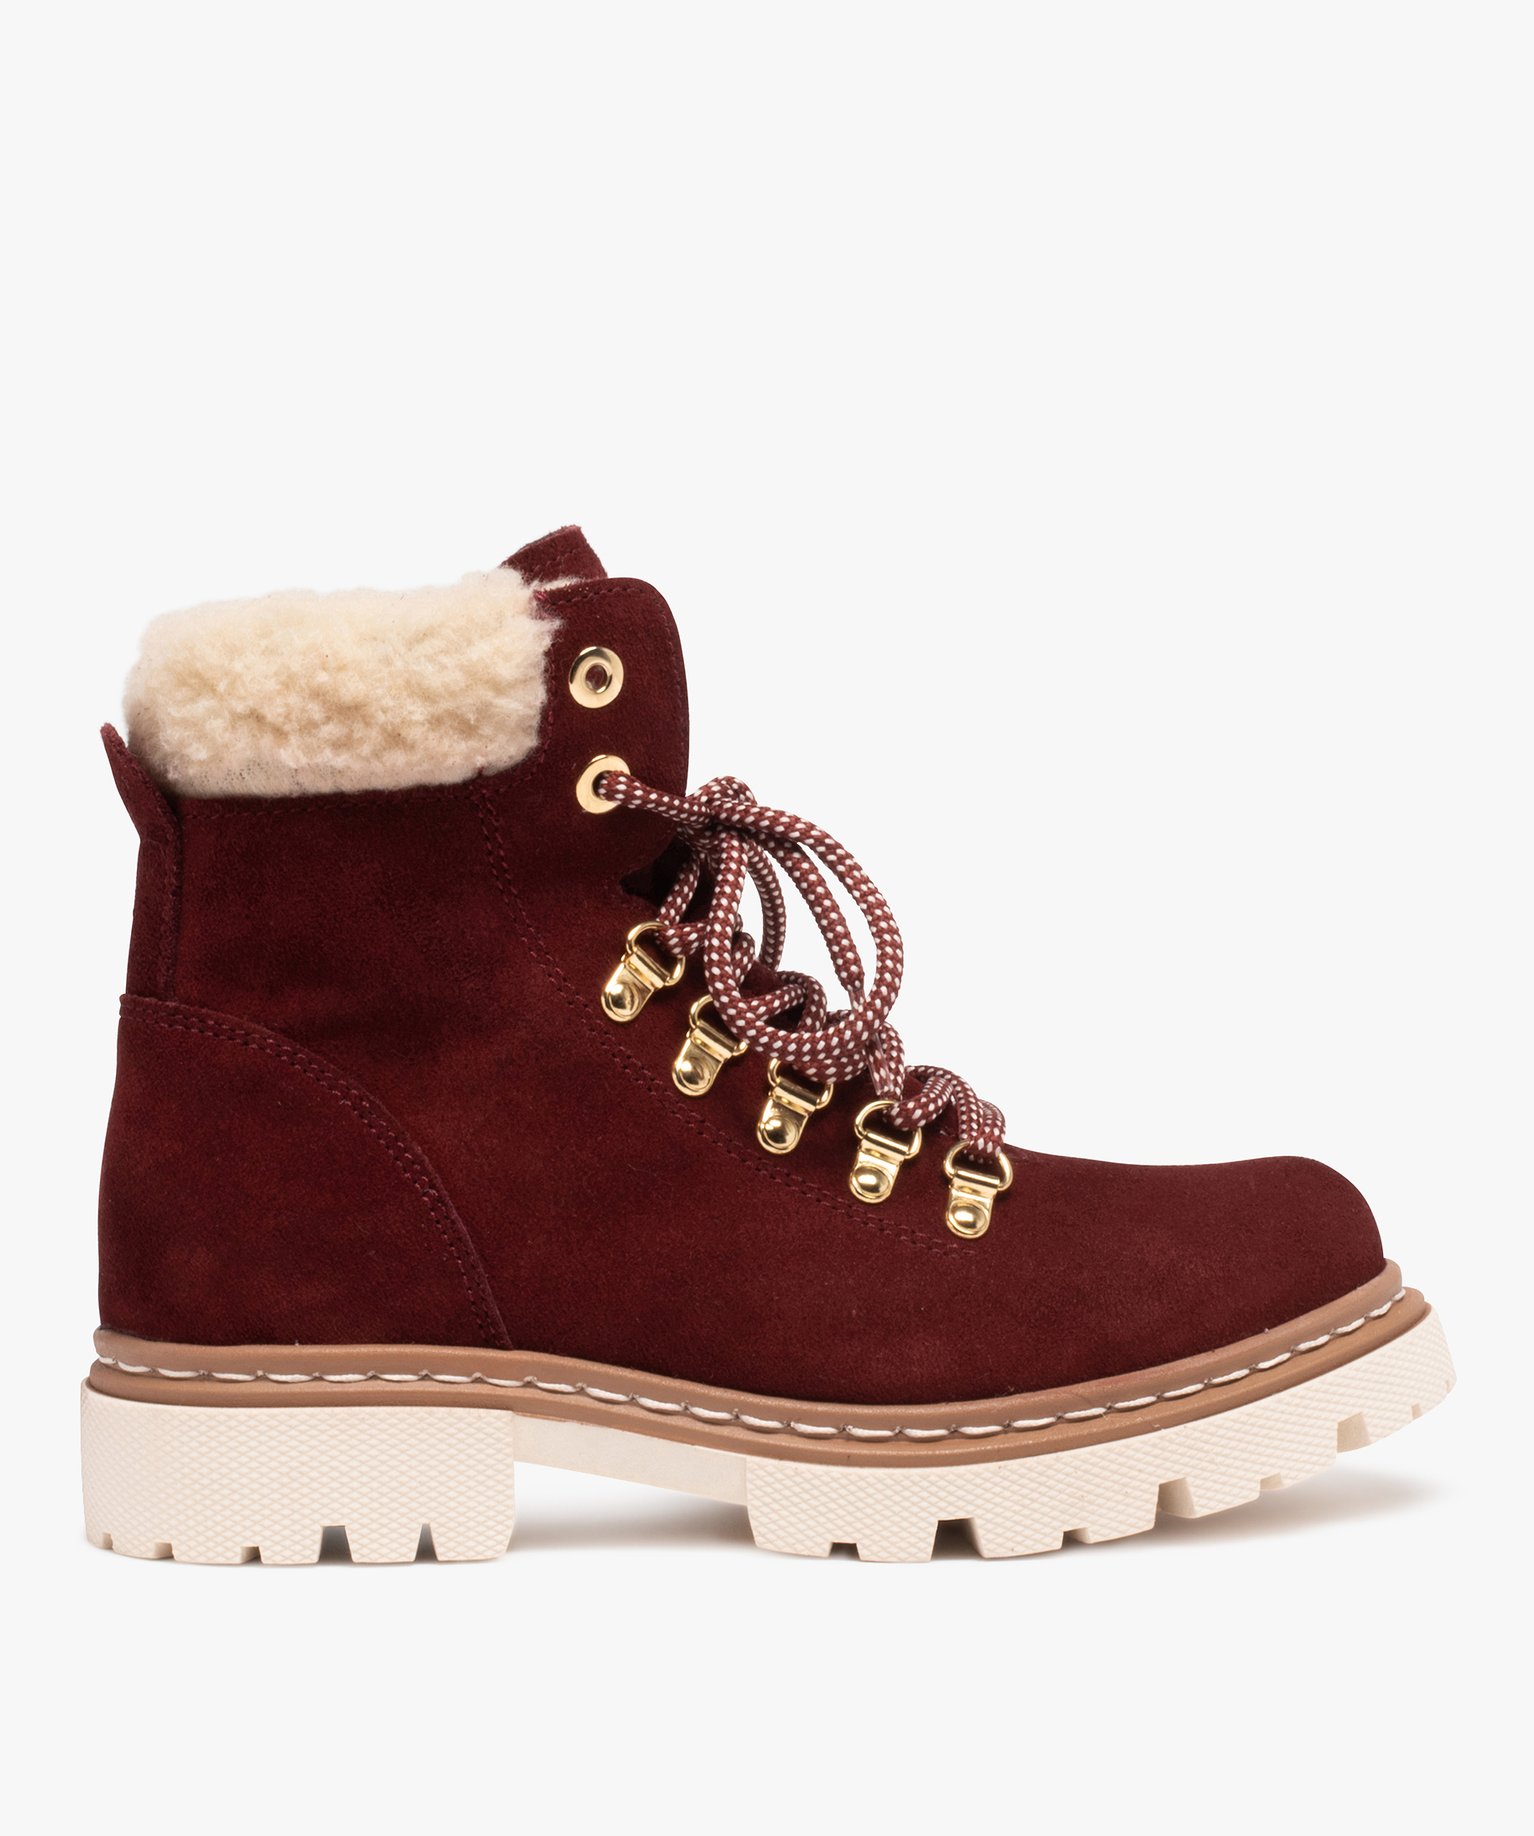 boots fourrees femme dessus cuir a col sherpa rouge